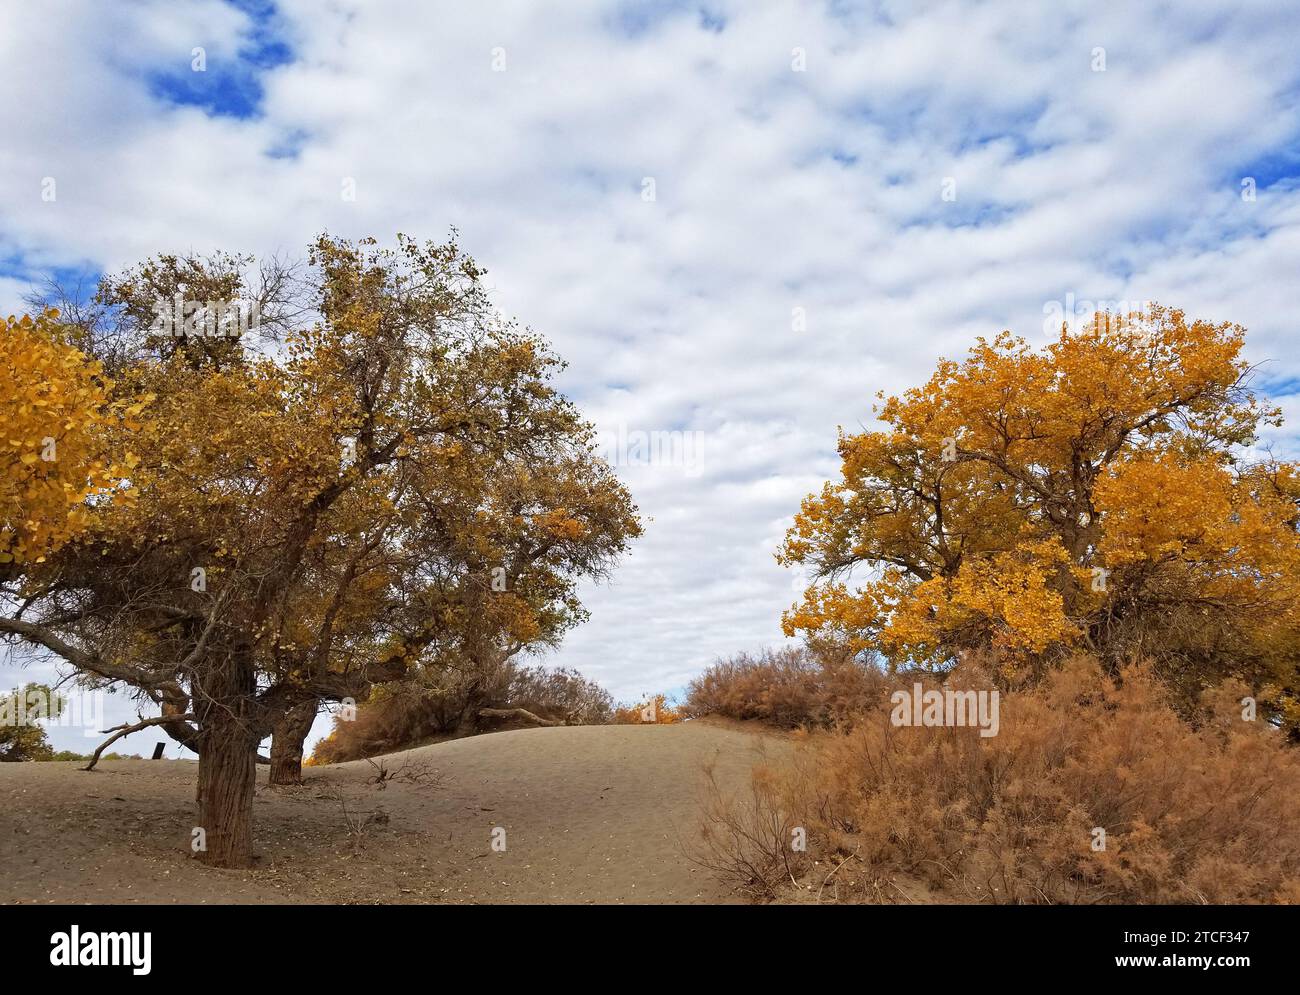 Populus euphratica or desert poplar trees, and their brilliant autumn foliage colors, provide many scenic views in an Inner Mongolia desert oasis unde Stock Photo